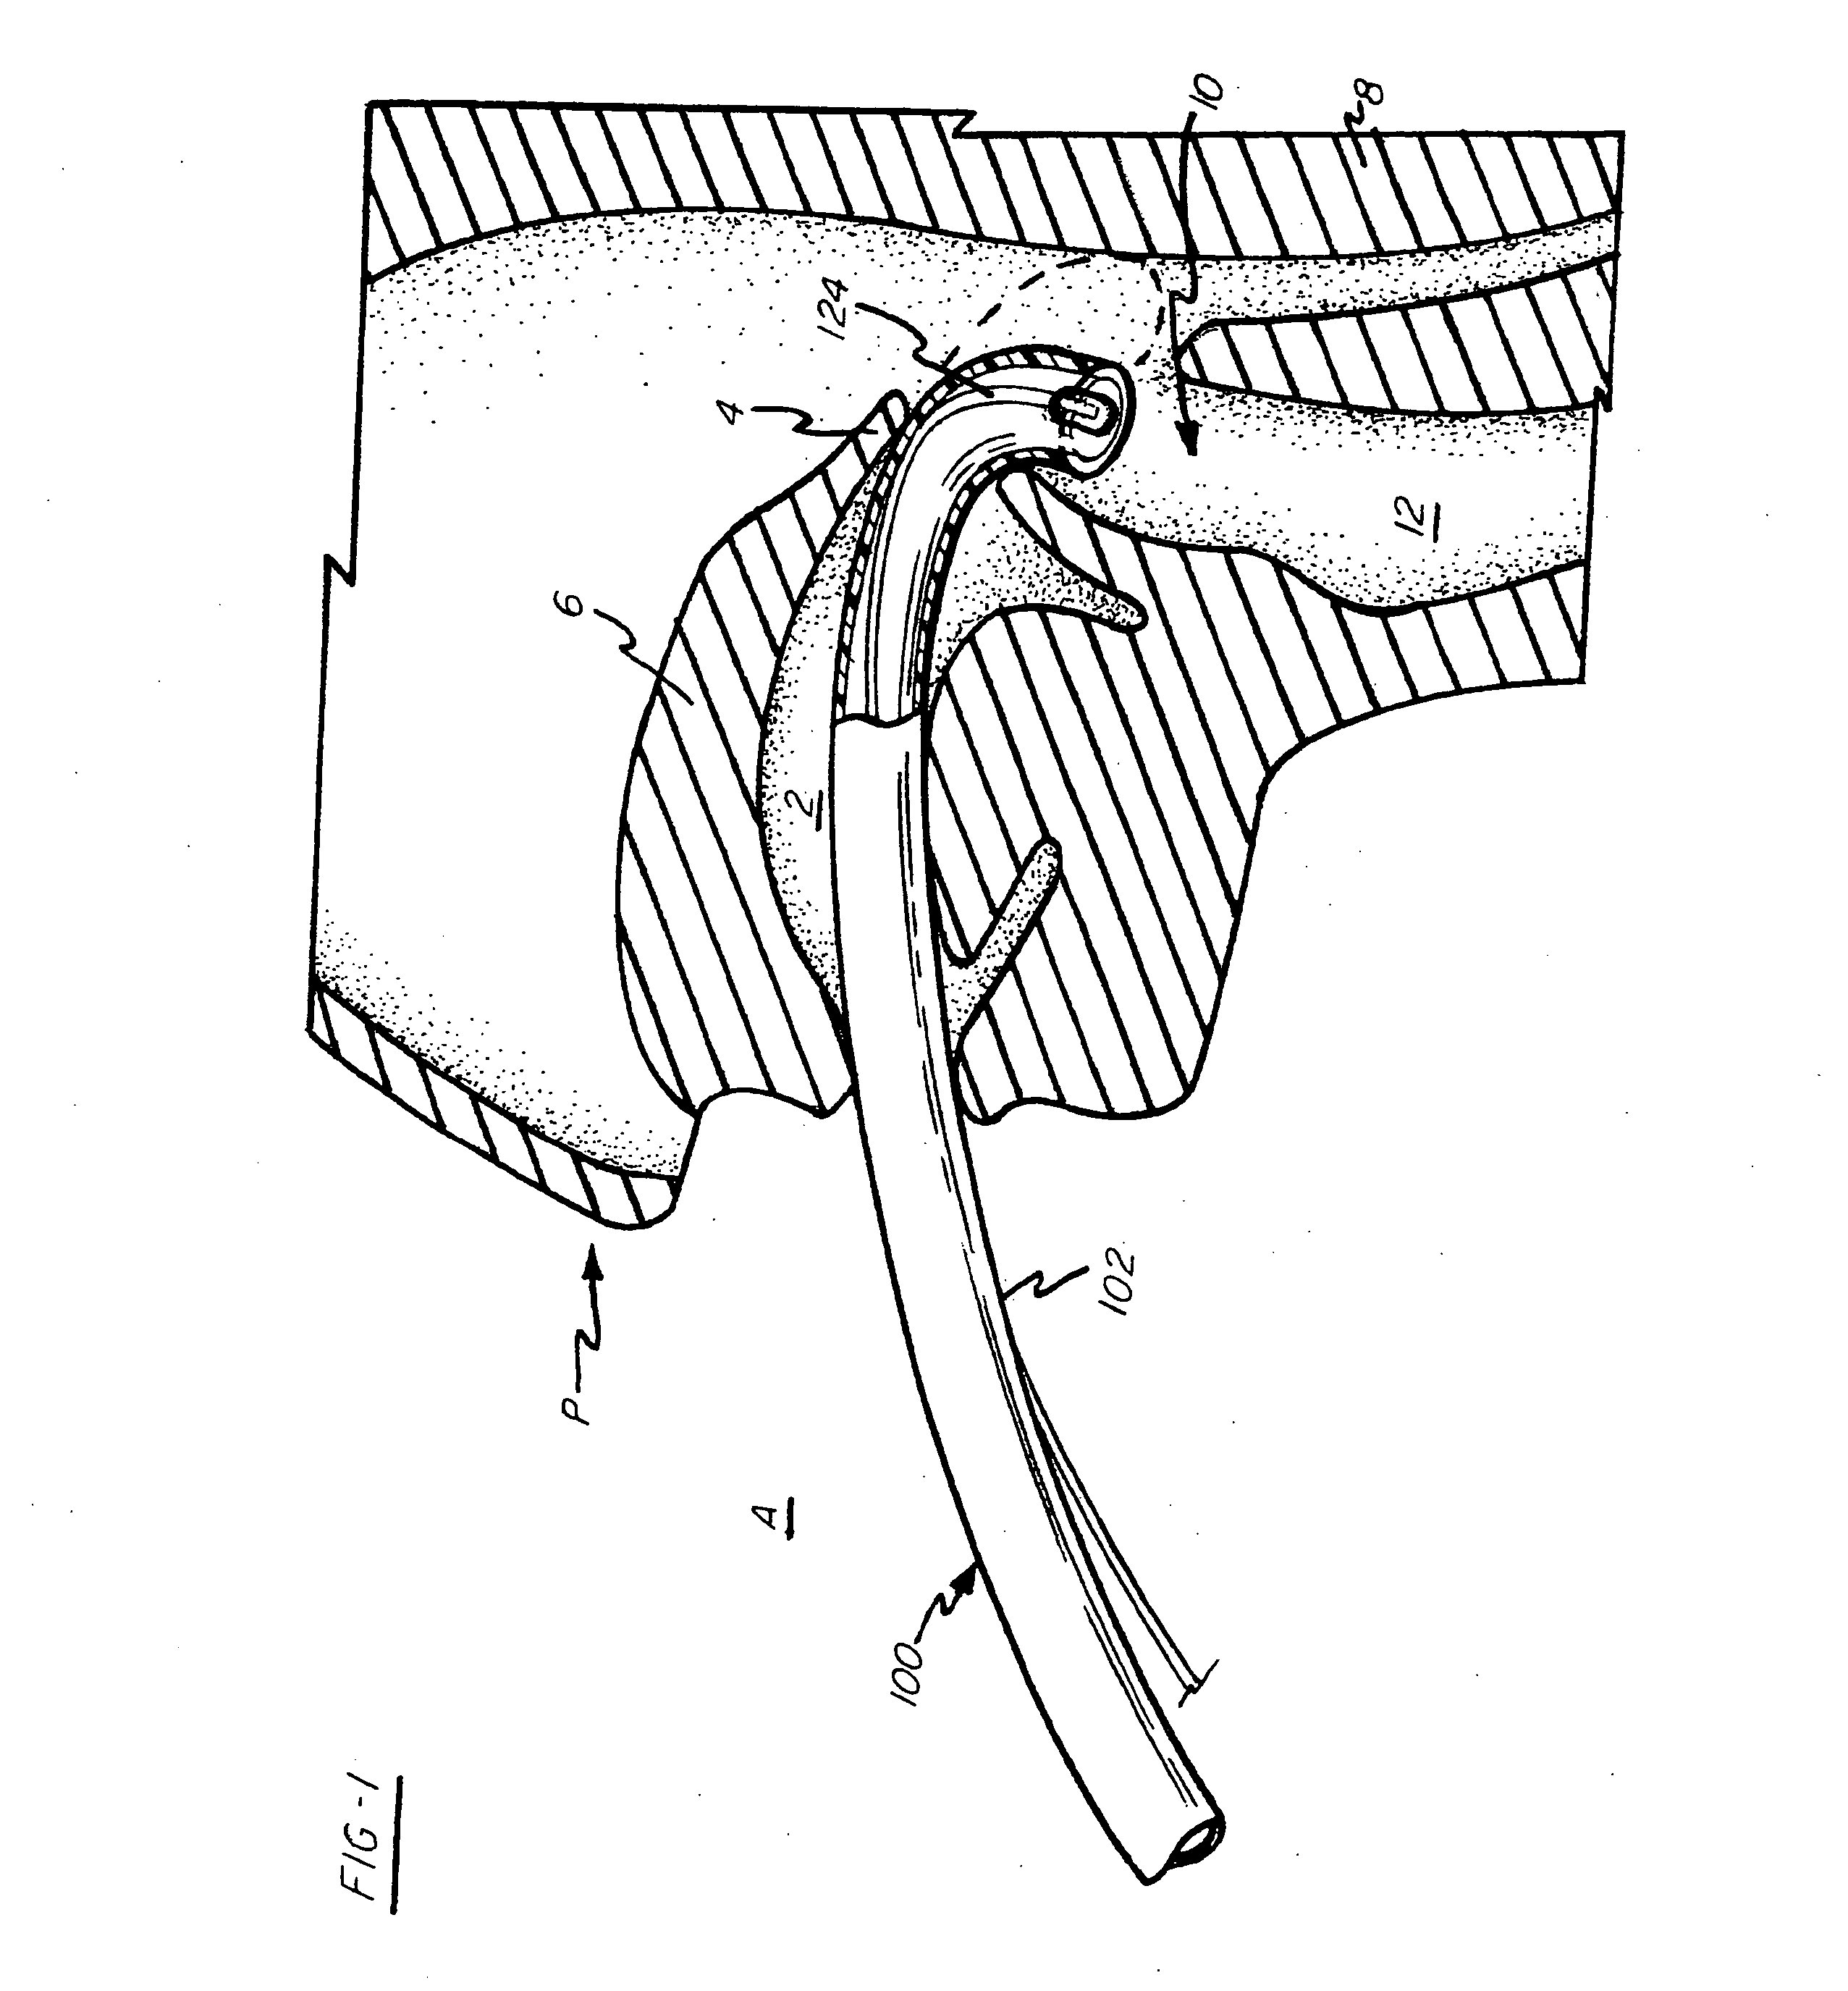 Intubation device and method of use